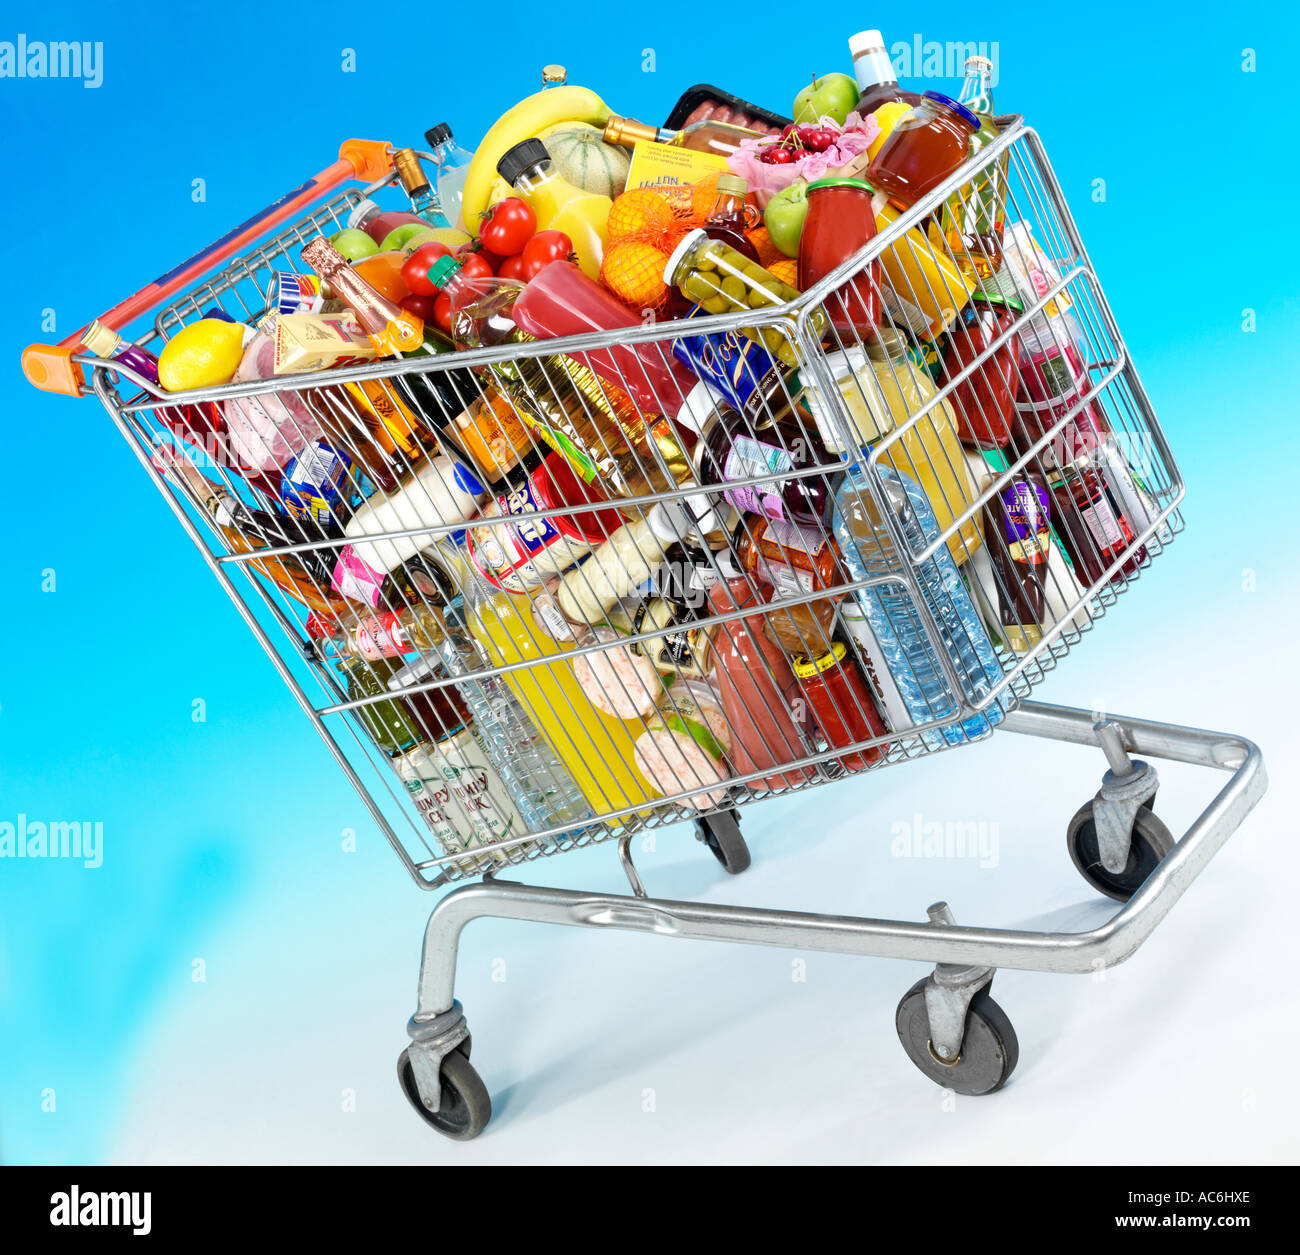 SHOPPING TROLLEY / GROCERY CART Stock Photo